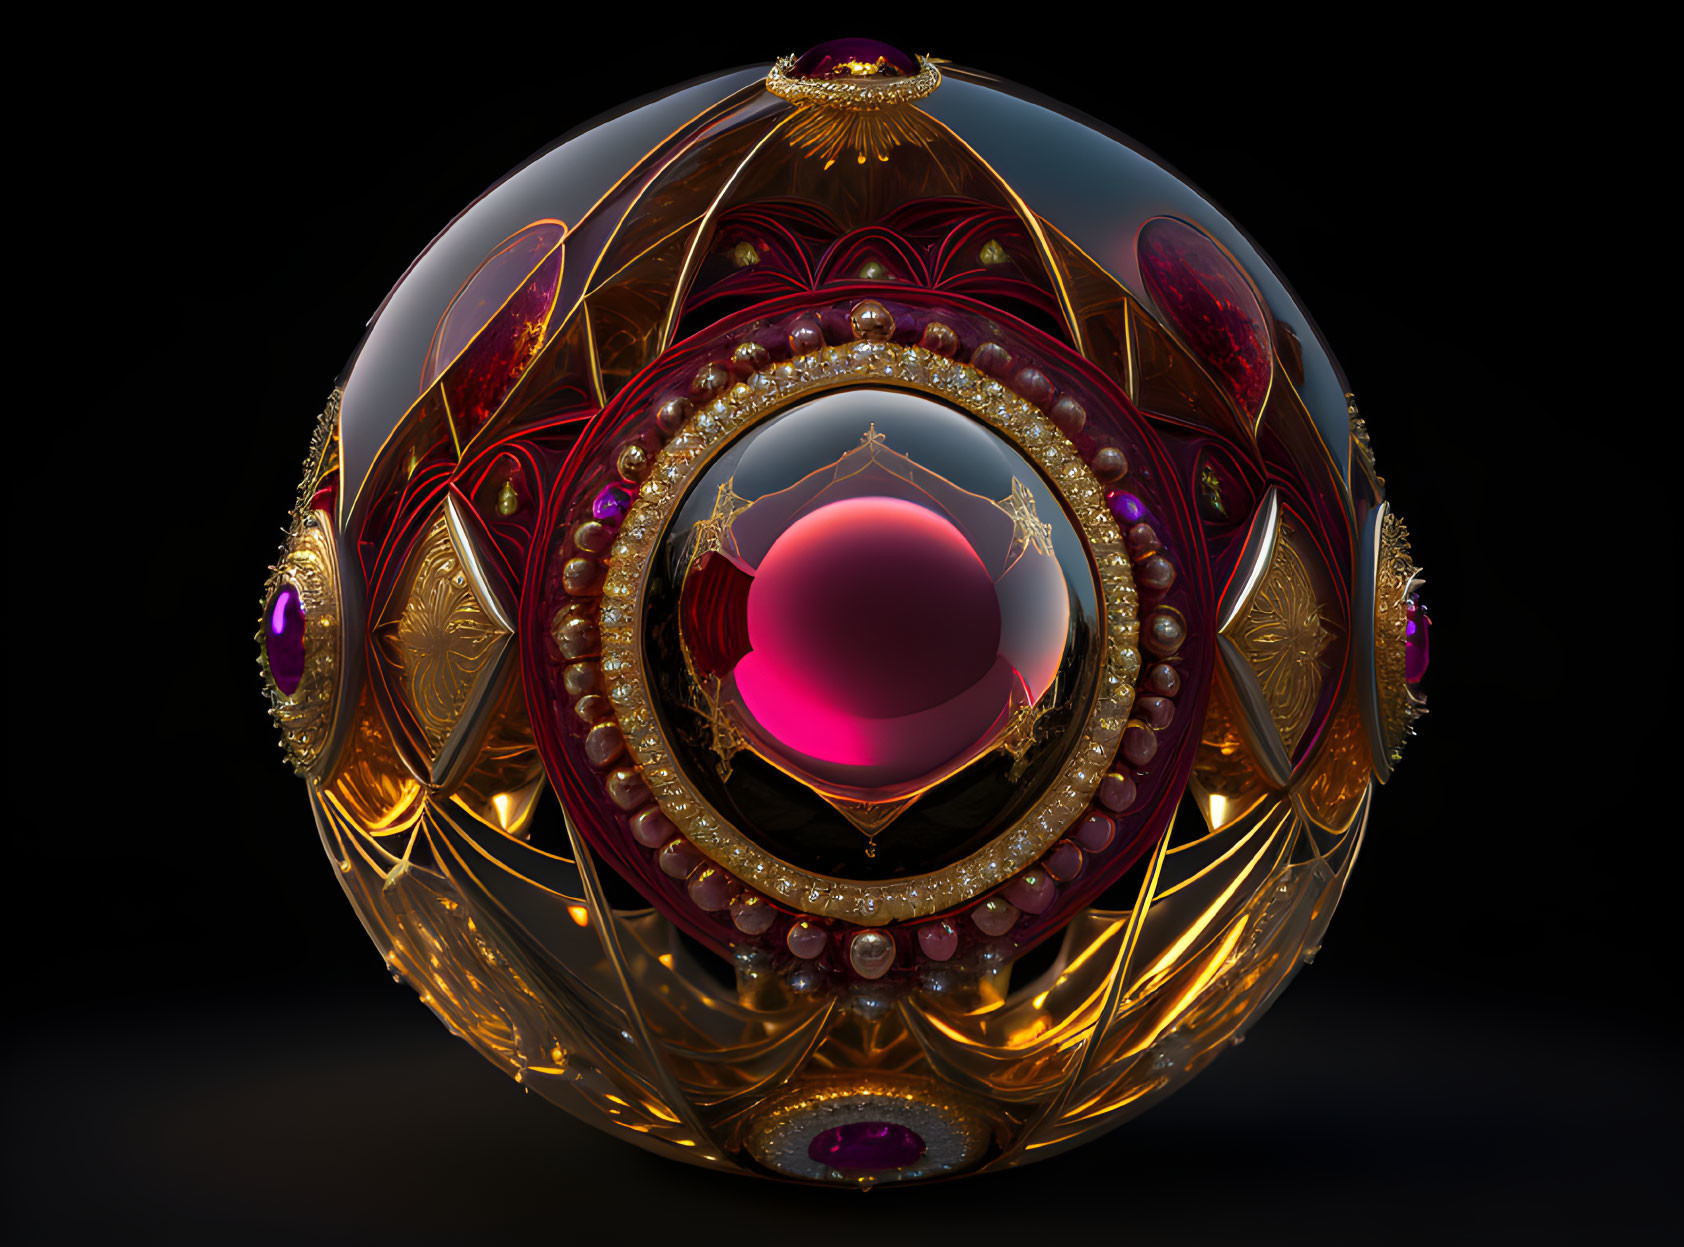 Intricate 3D art object with gold, red, and purple patterns on dark background